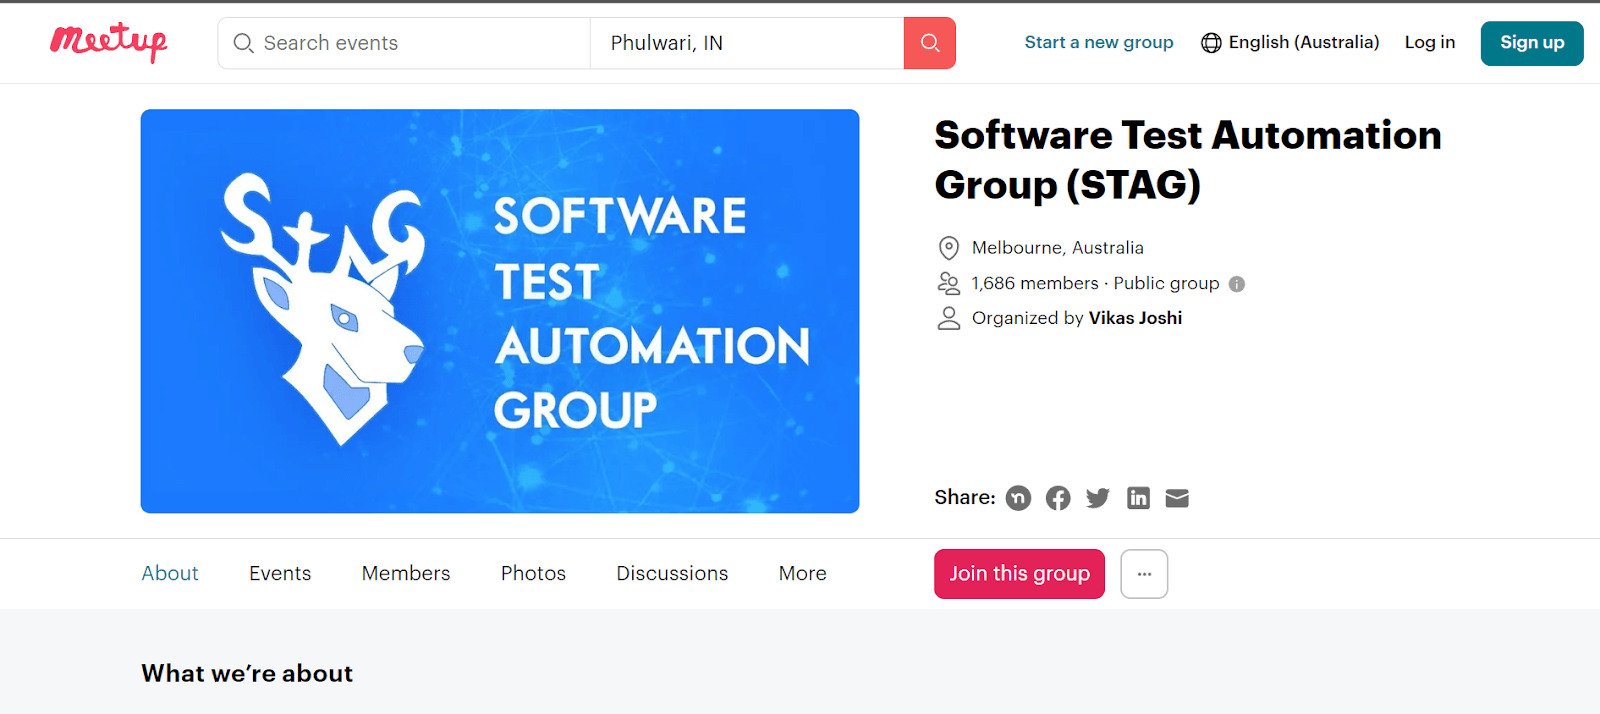 Software Test Automation Group